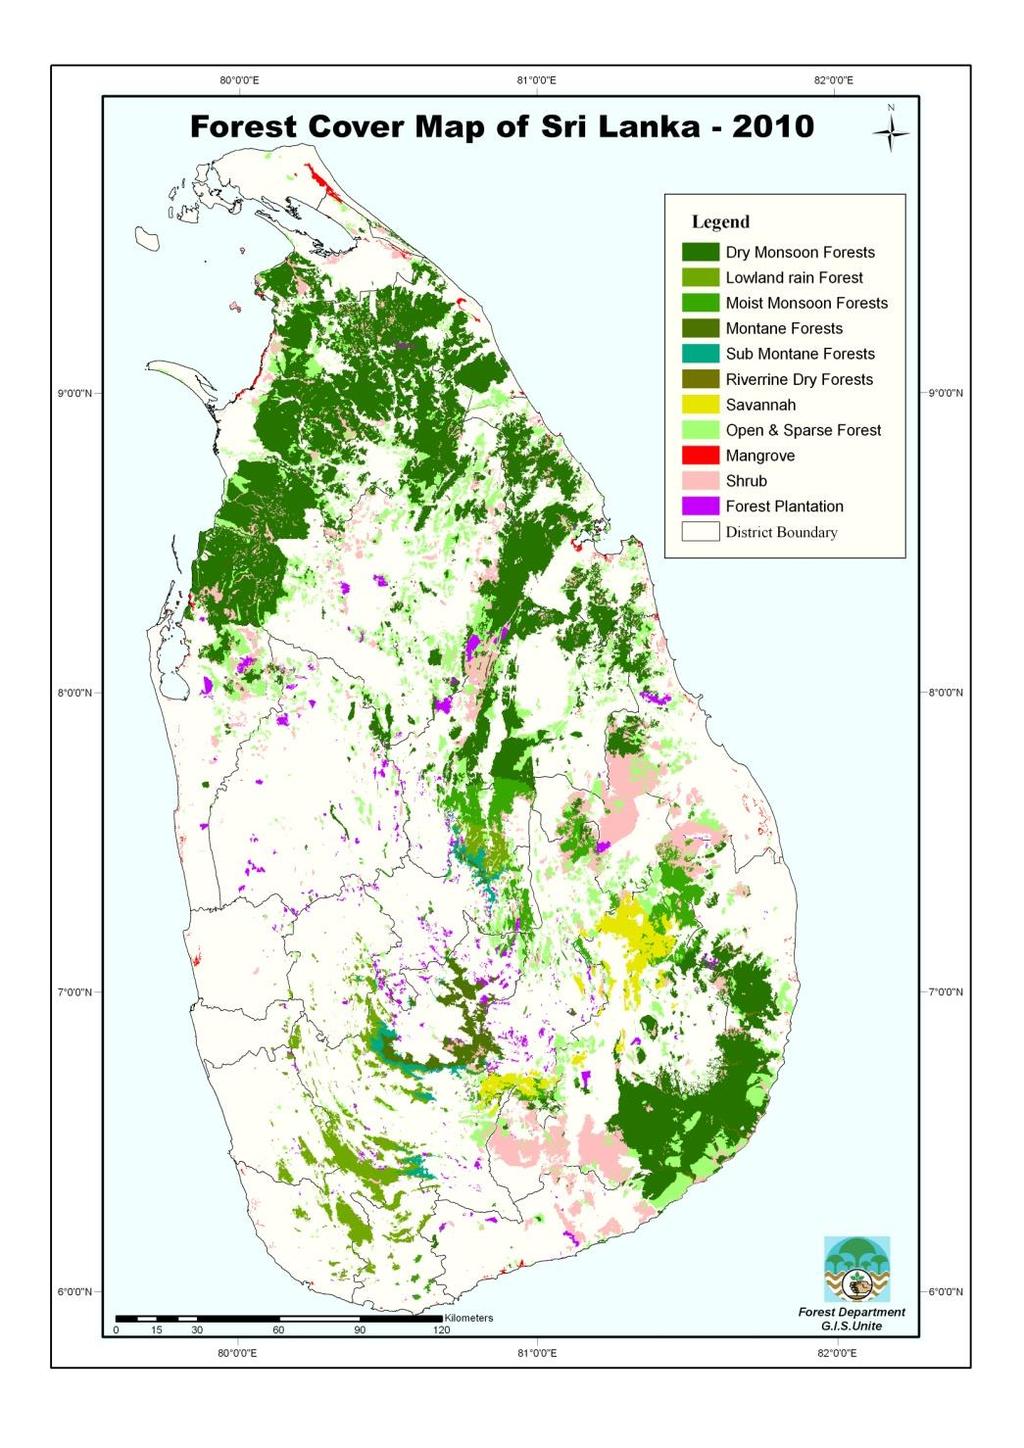 Dense forest (Canopy Cover over 40%) 22% Sparse Forests (Canopy Cover